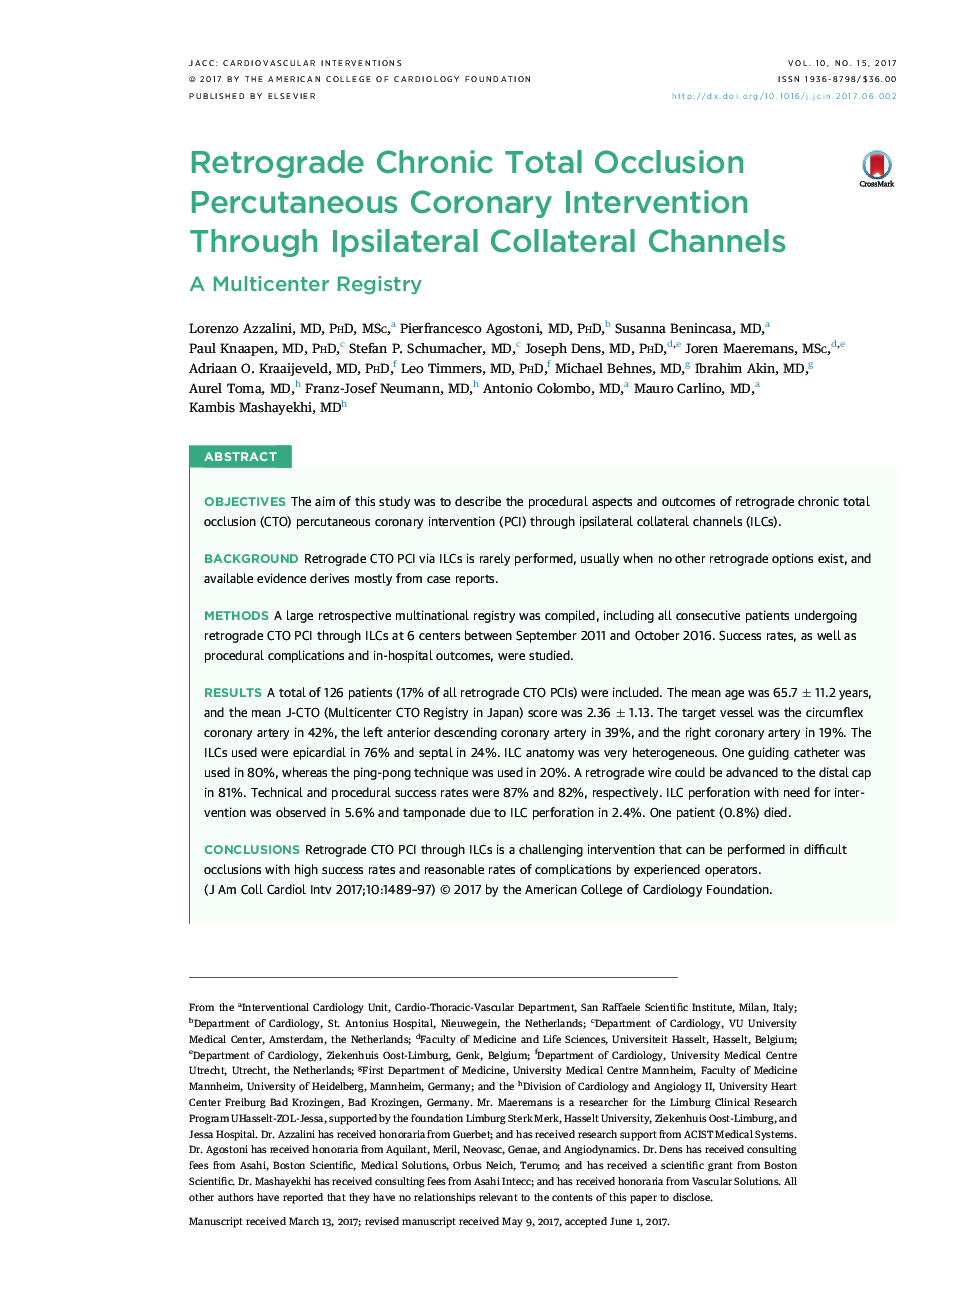 Retrograde Chronic Total Occlusion Percutaneous Coronary Intervention Through Ipsilateral Collateral Channels